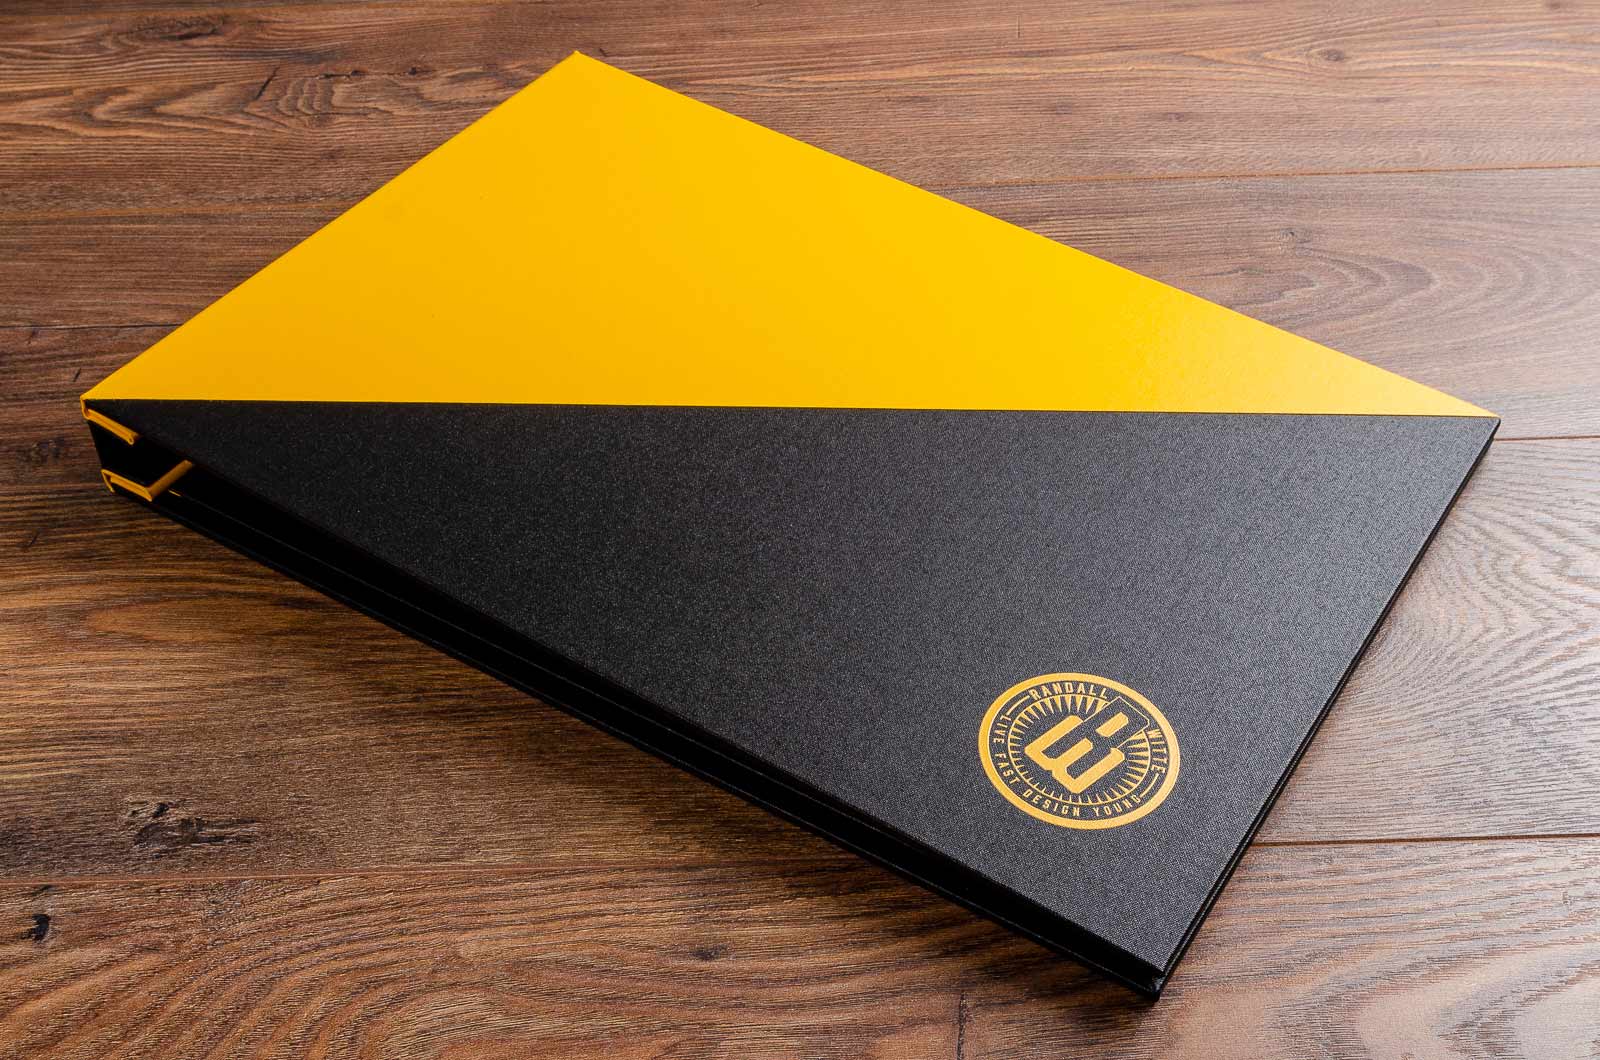 Portfolio book for graphic designer. Size is 11x17 inches. Product is hidden screw post binder. Colour is black and yellow buckram. Personalisation in fill colour UV printing